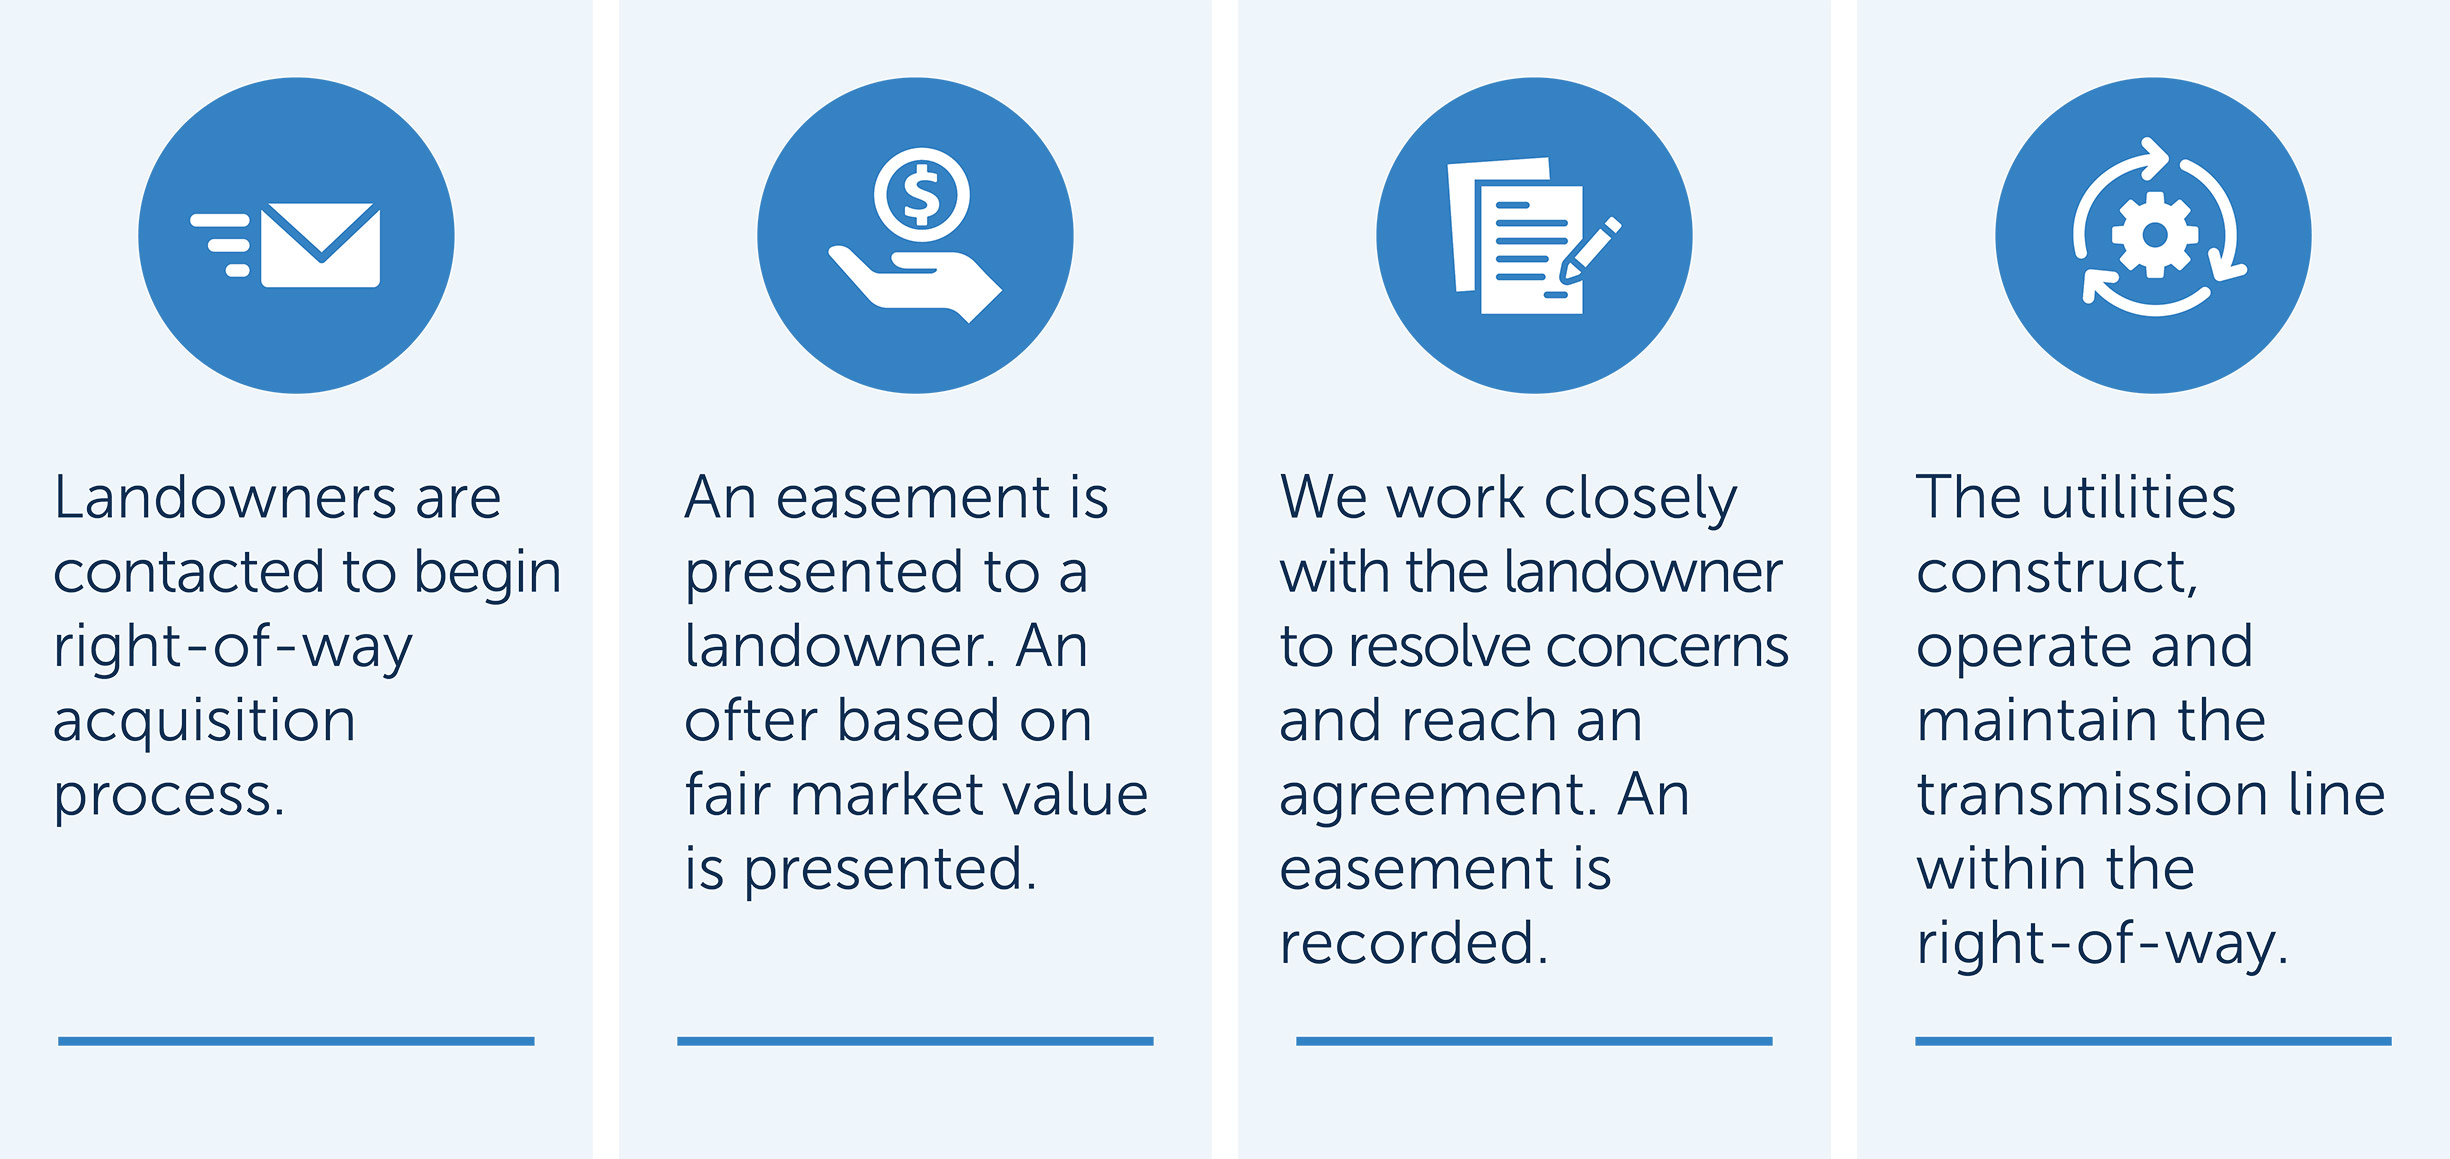 Landowners are contacted and an easement is presented based on fair-market value. We work to reach an agreement and the utilities maintain the transmission.